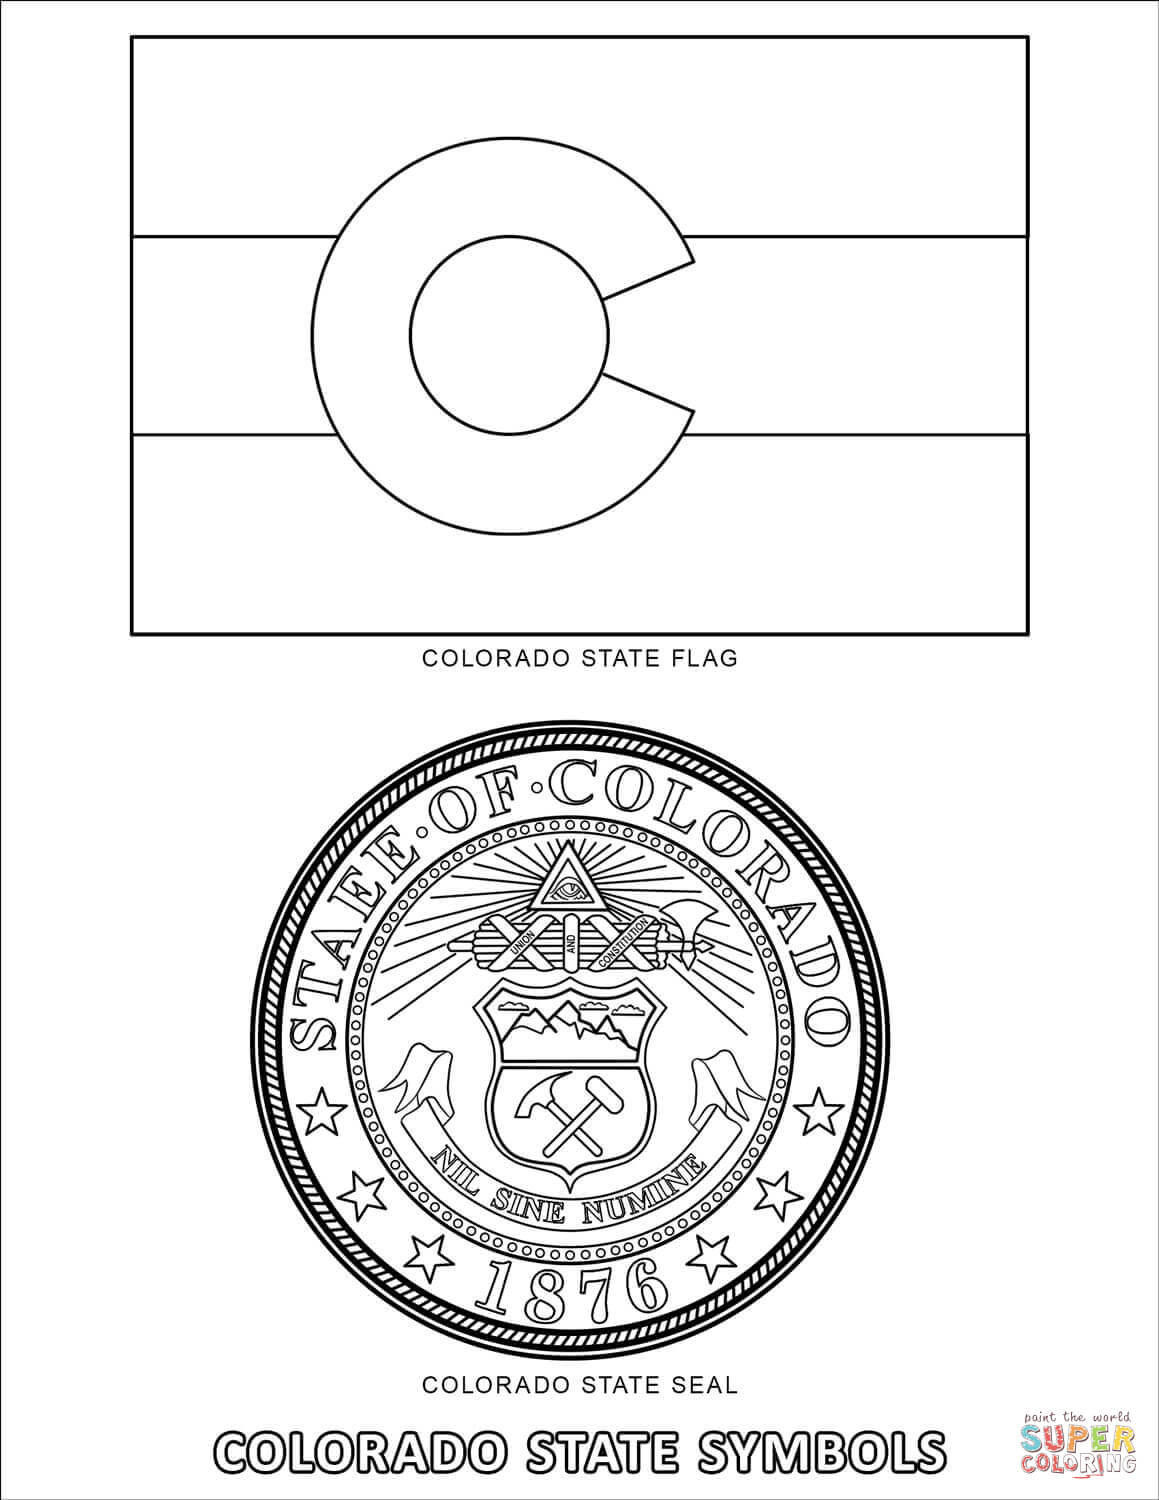 Colorado State Symbols coloring page | Free Printable Coloring Pages